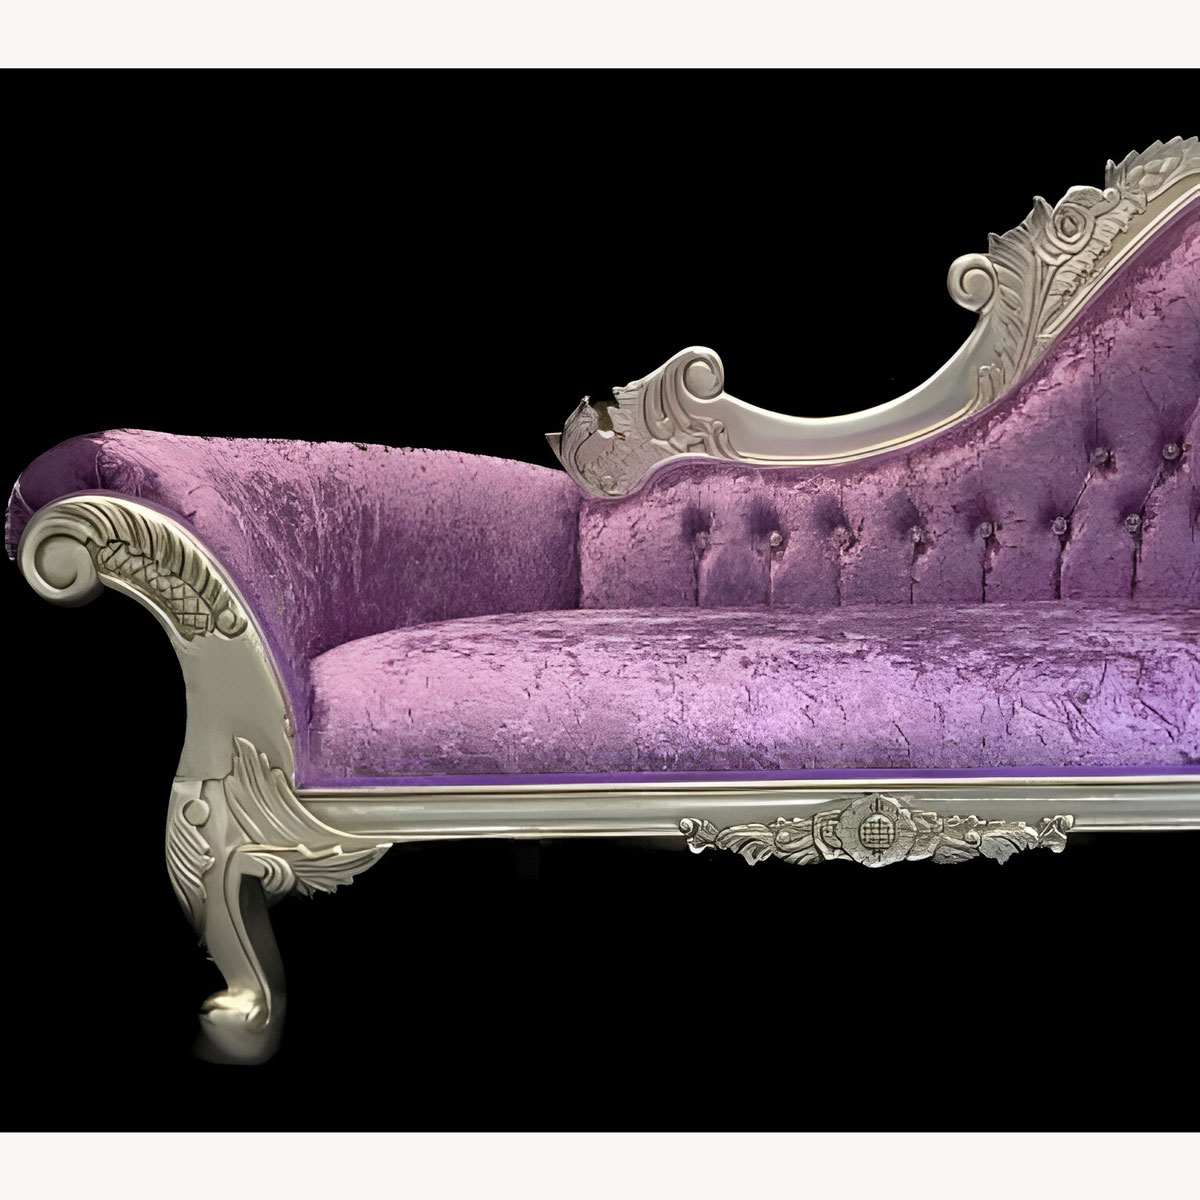 Silver Leaf Medium Hampshire Chaise In Lavender Crushed Velvet With Crystal Buttoning 3 - Hampshire Barn Interiors - Silver Leaf Medium Hampshire Chaise In Lavender Crushed Velvet With Crystal Buttoning -